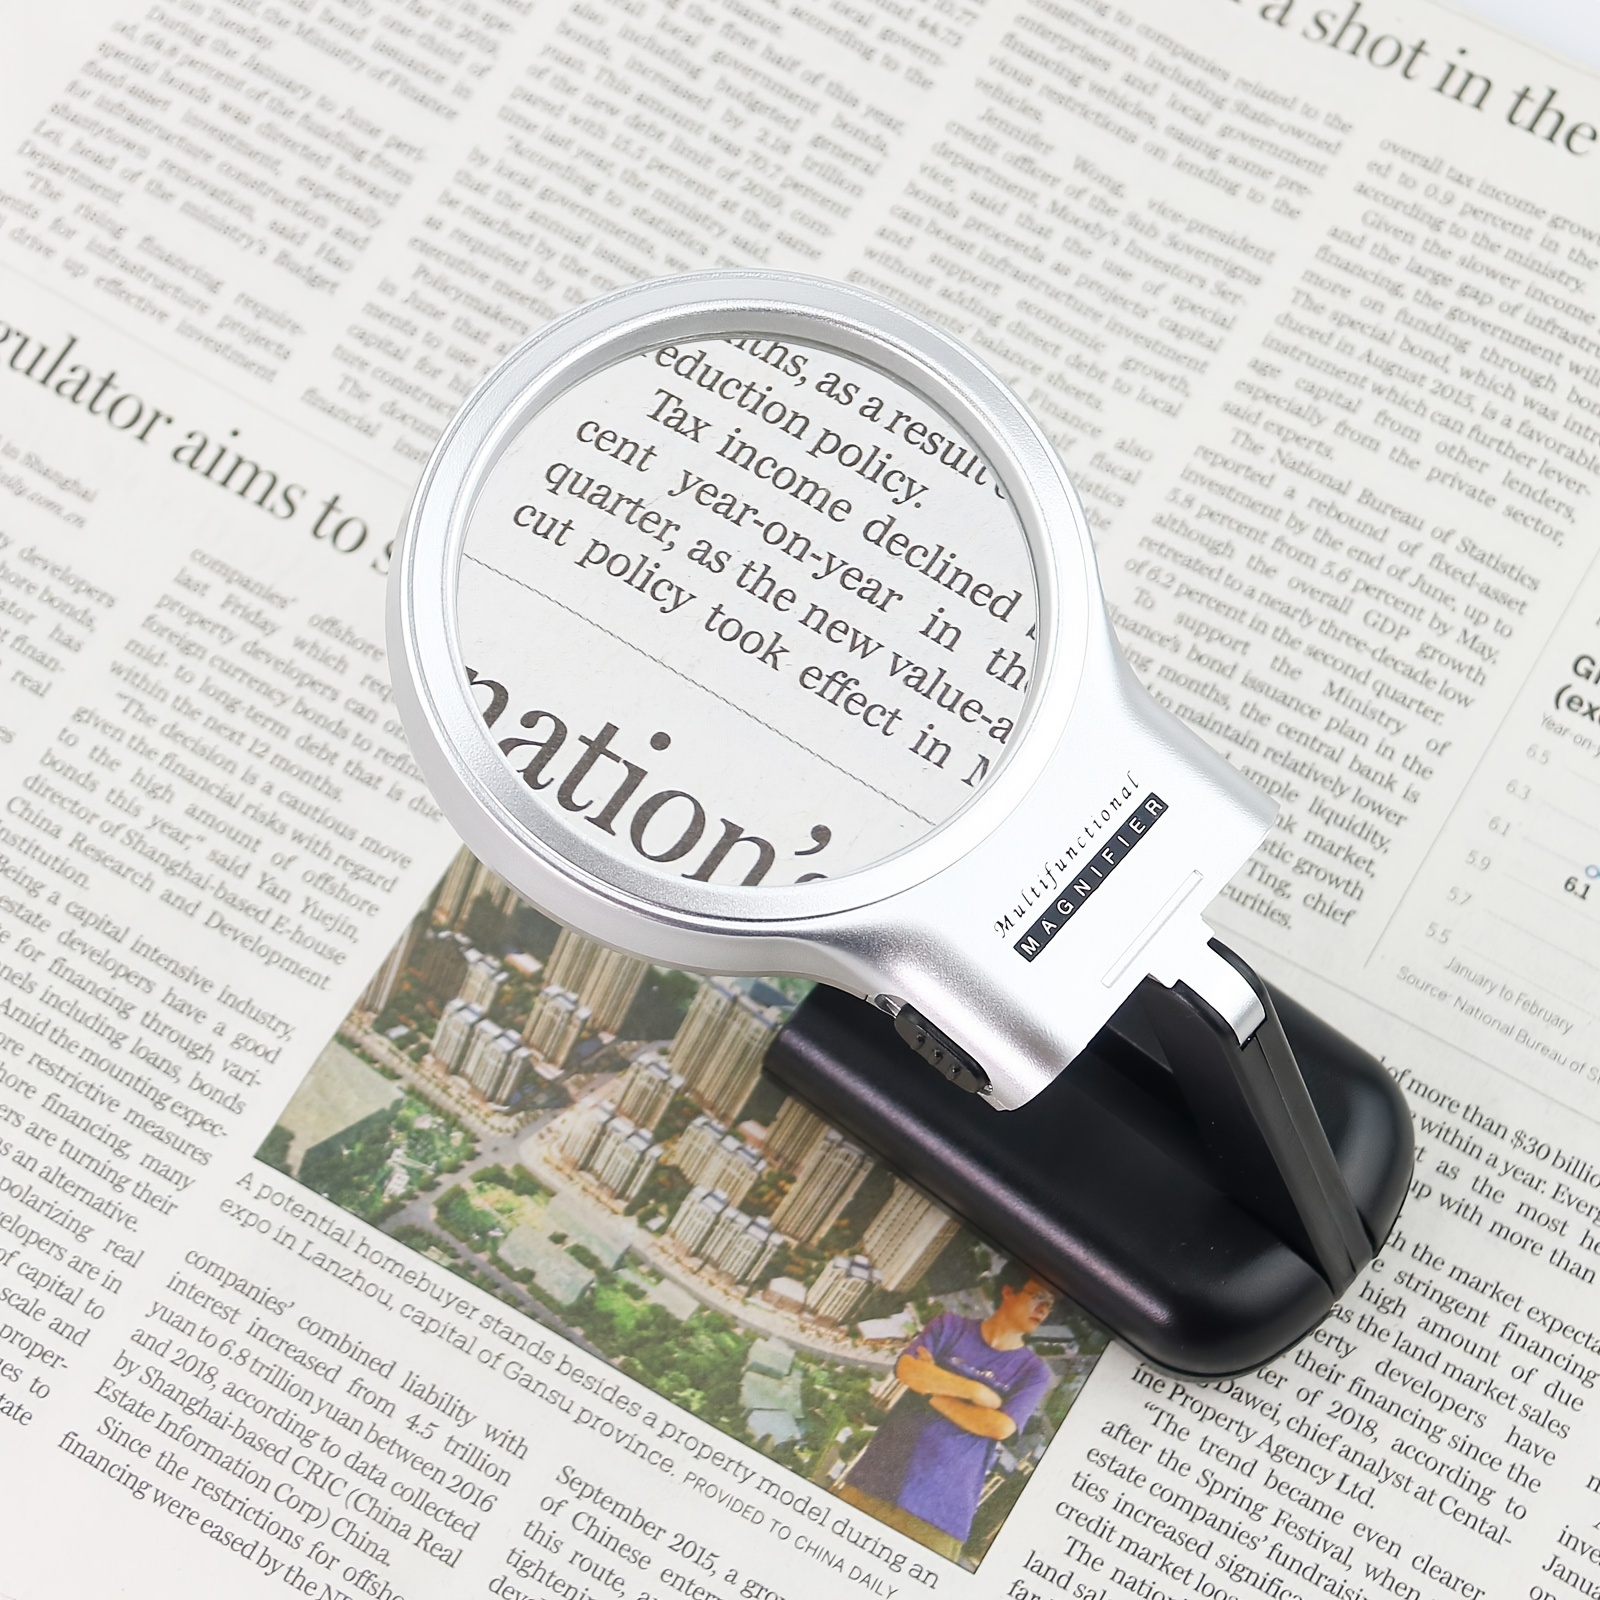 magnifying glass with led light For Flawless Viewing And Reading 